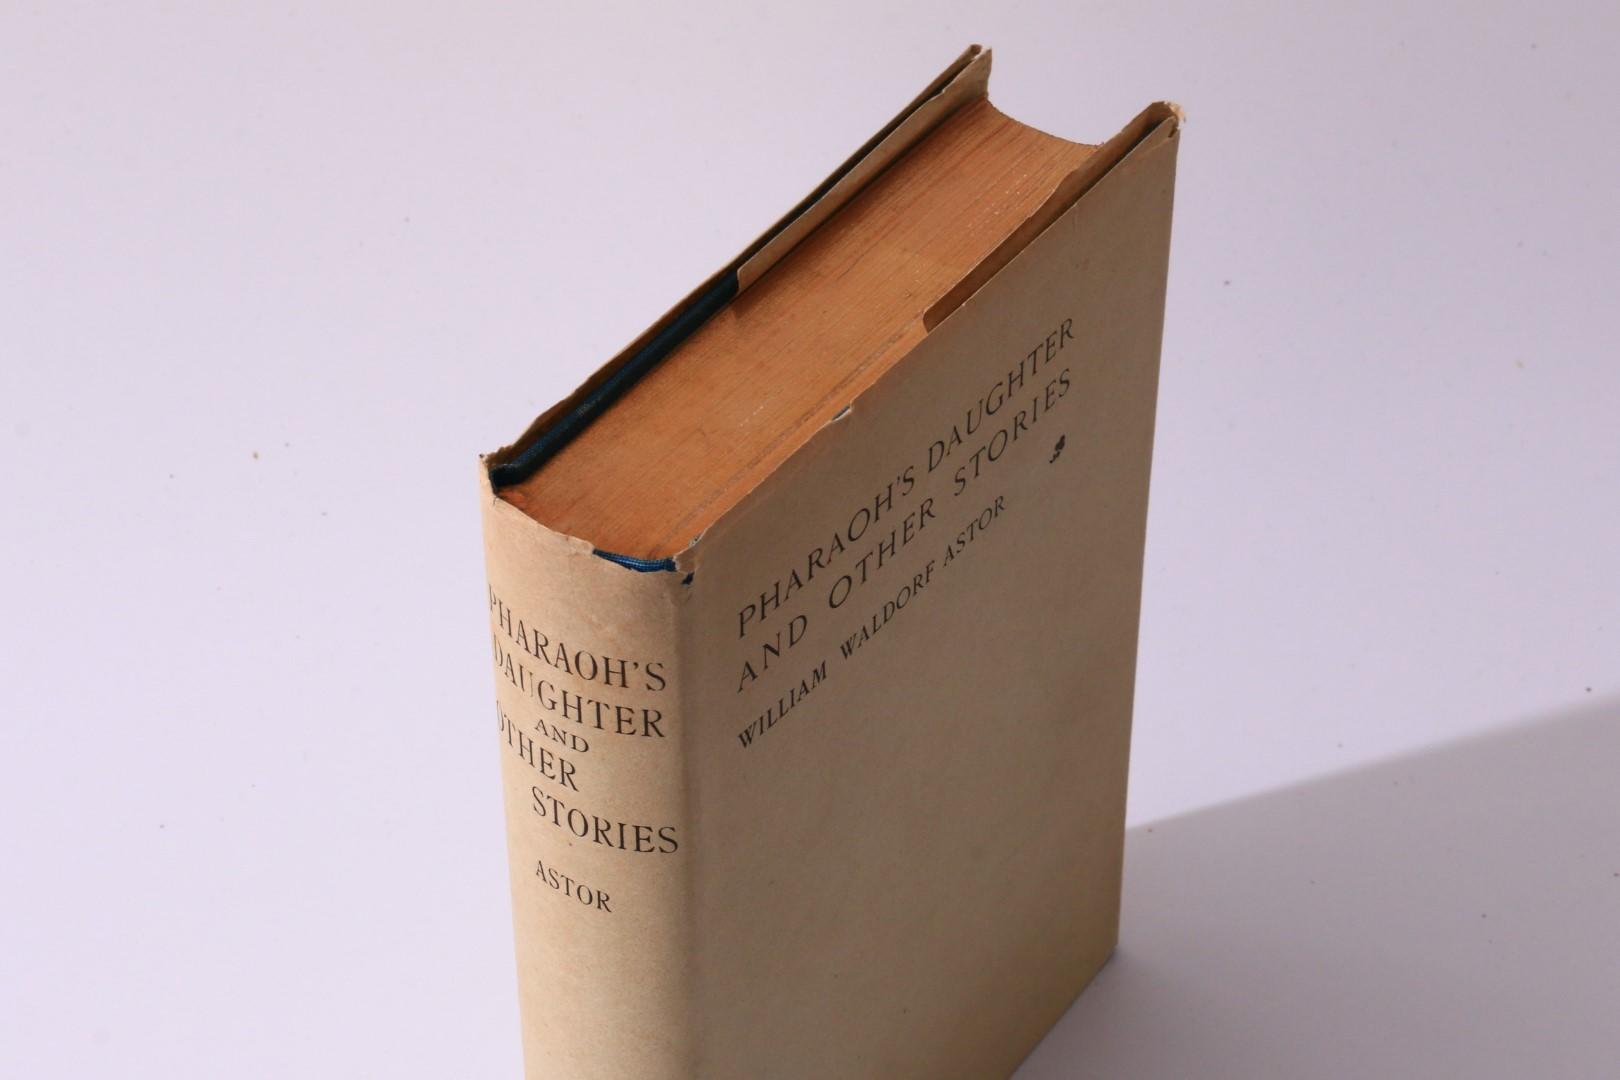 William Waldorf Astor - Pharoah's Daughter and Other Stories - Macmillan, 1900, First Edition.